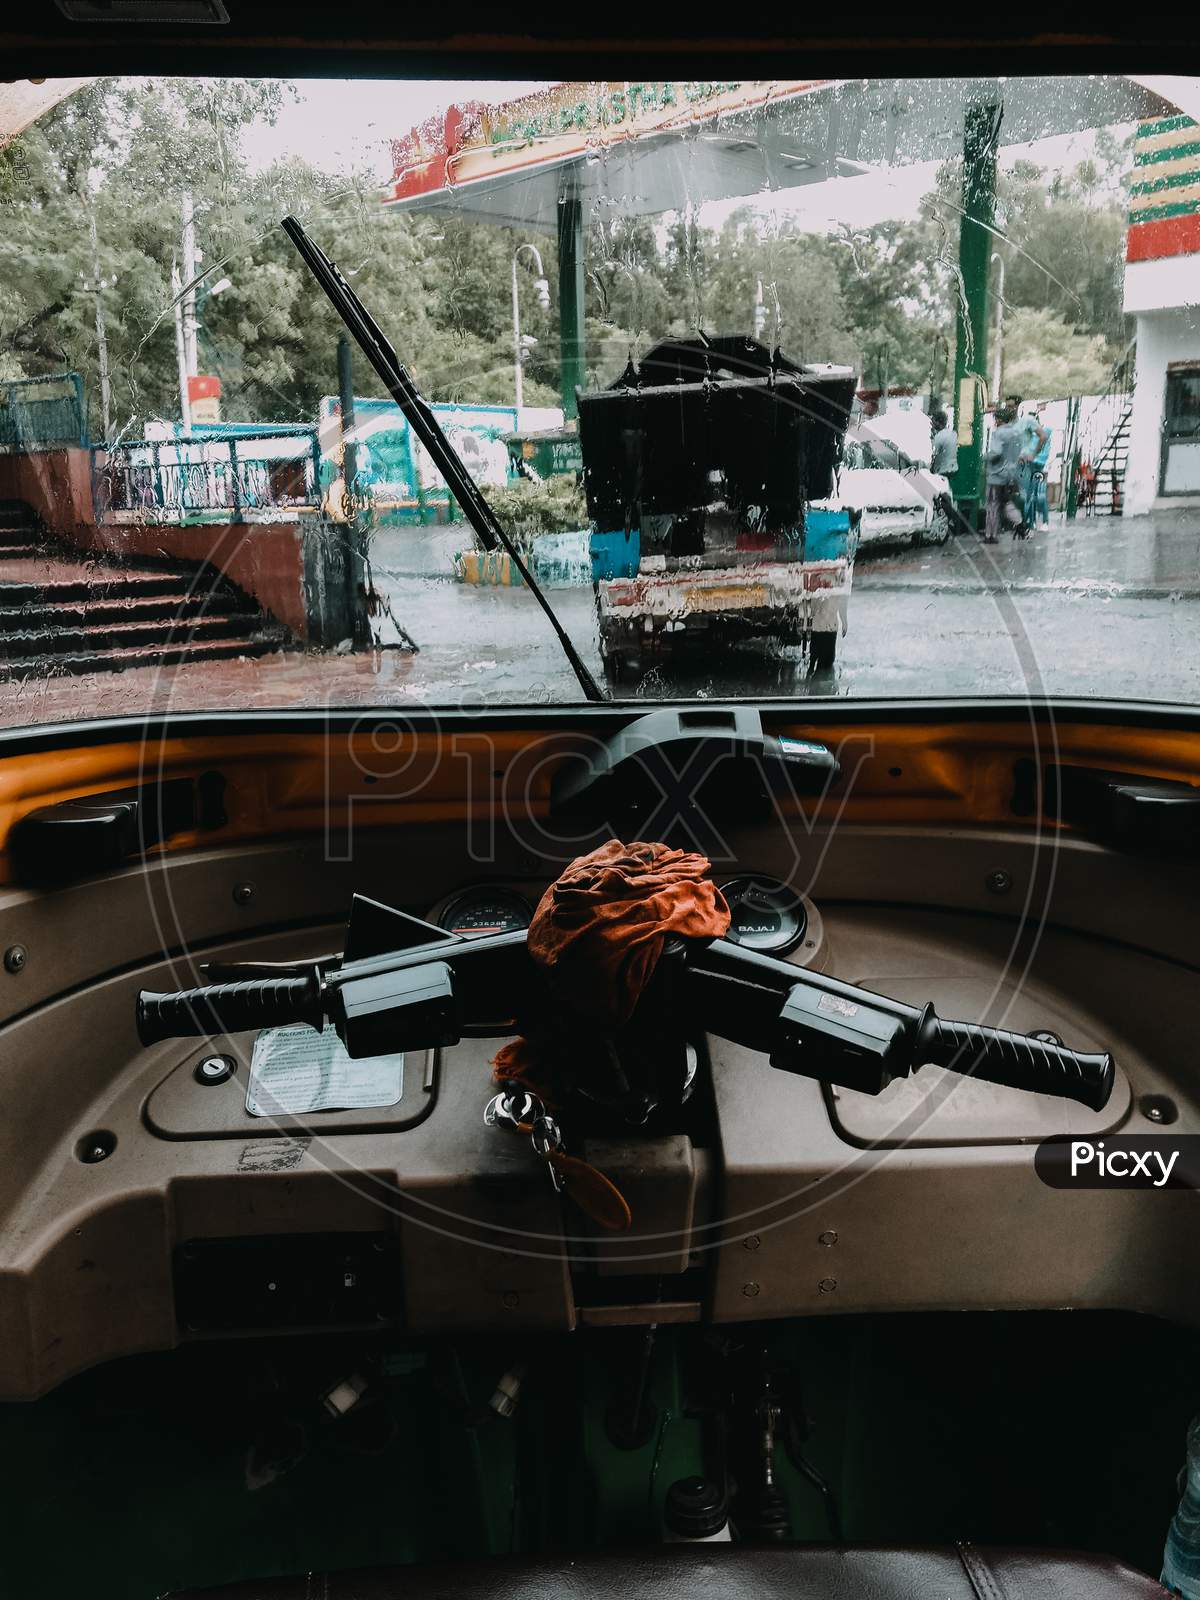 Delhi, India, 15 June 2020 - Inside Look Of Indian Auto Rikshaw On The Street (Tuk-Tuk) Used By Tourists And Local As Means Of Transportation